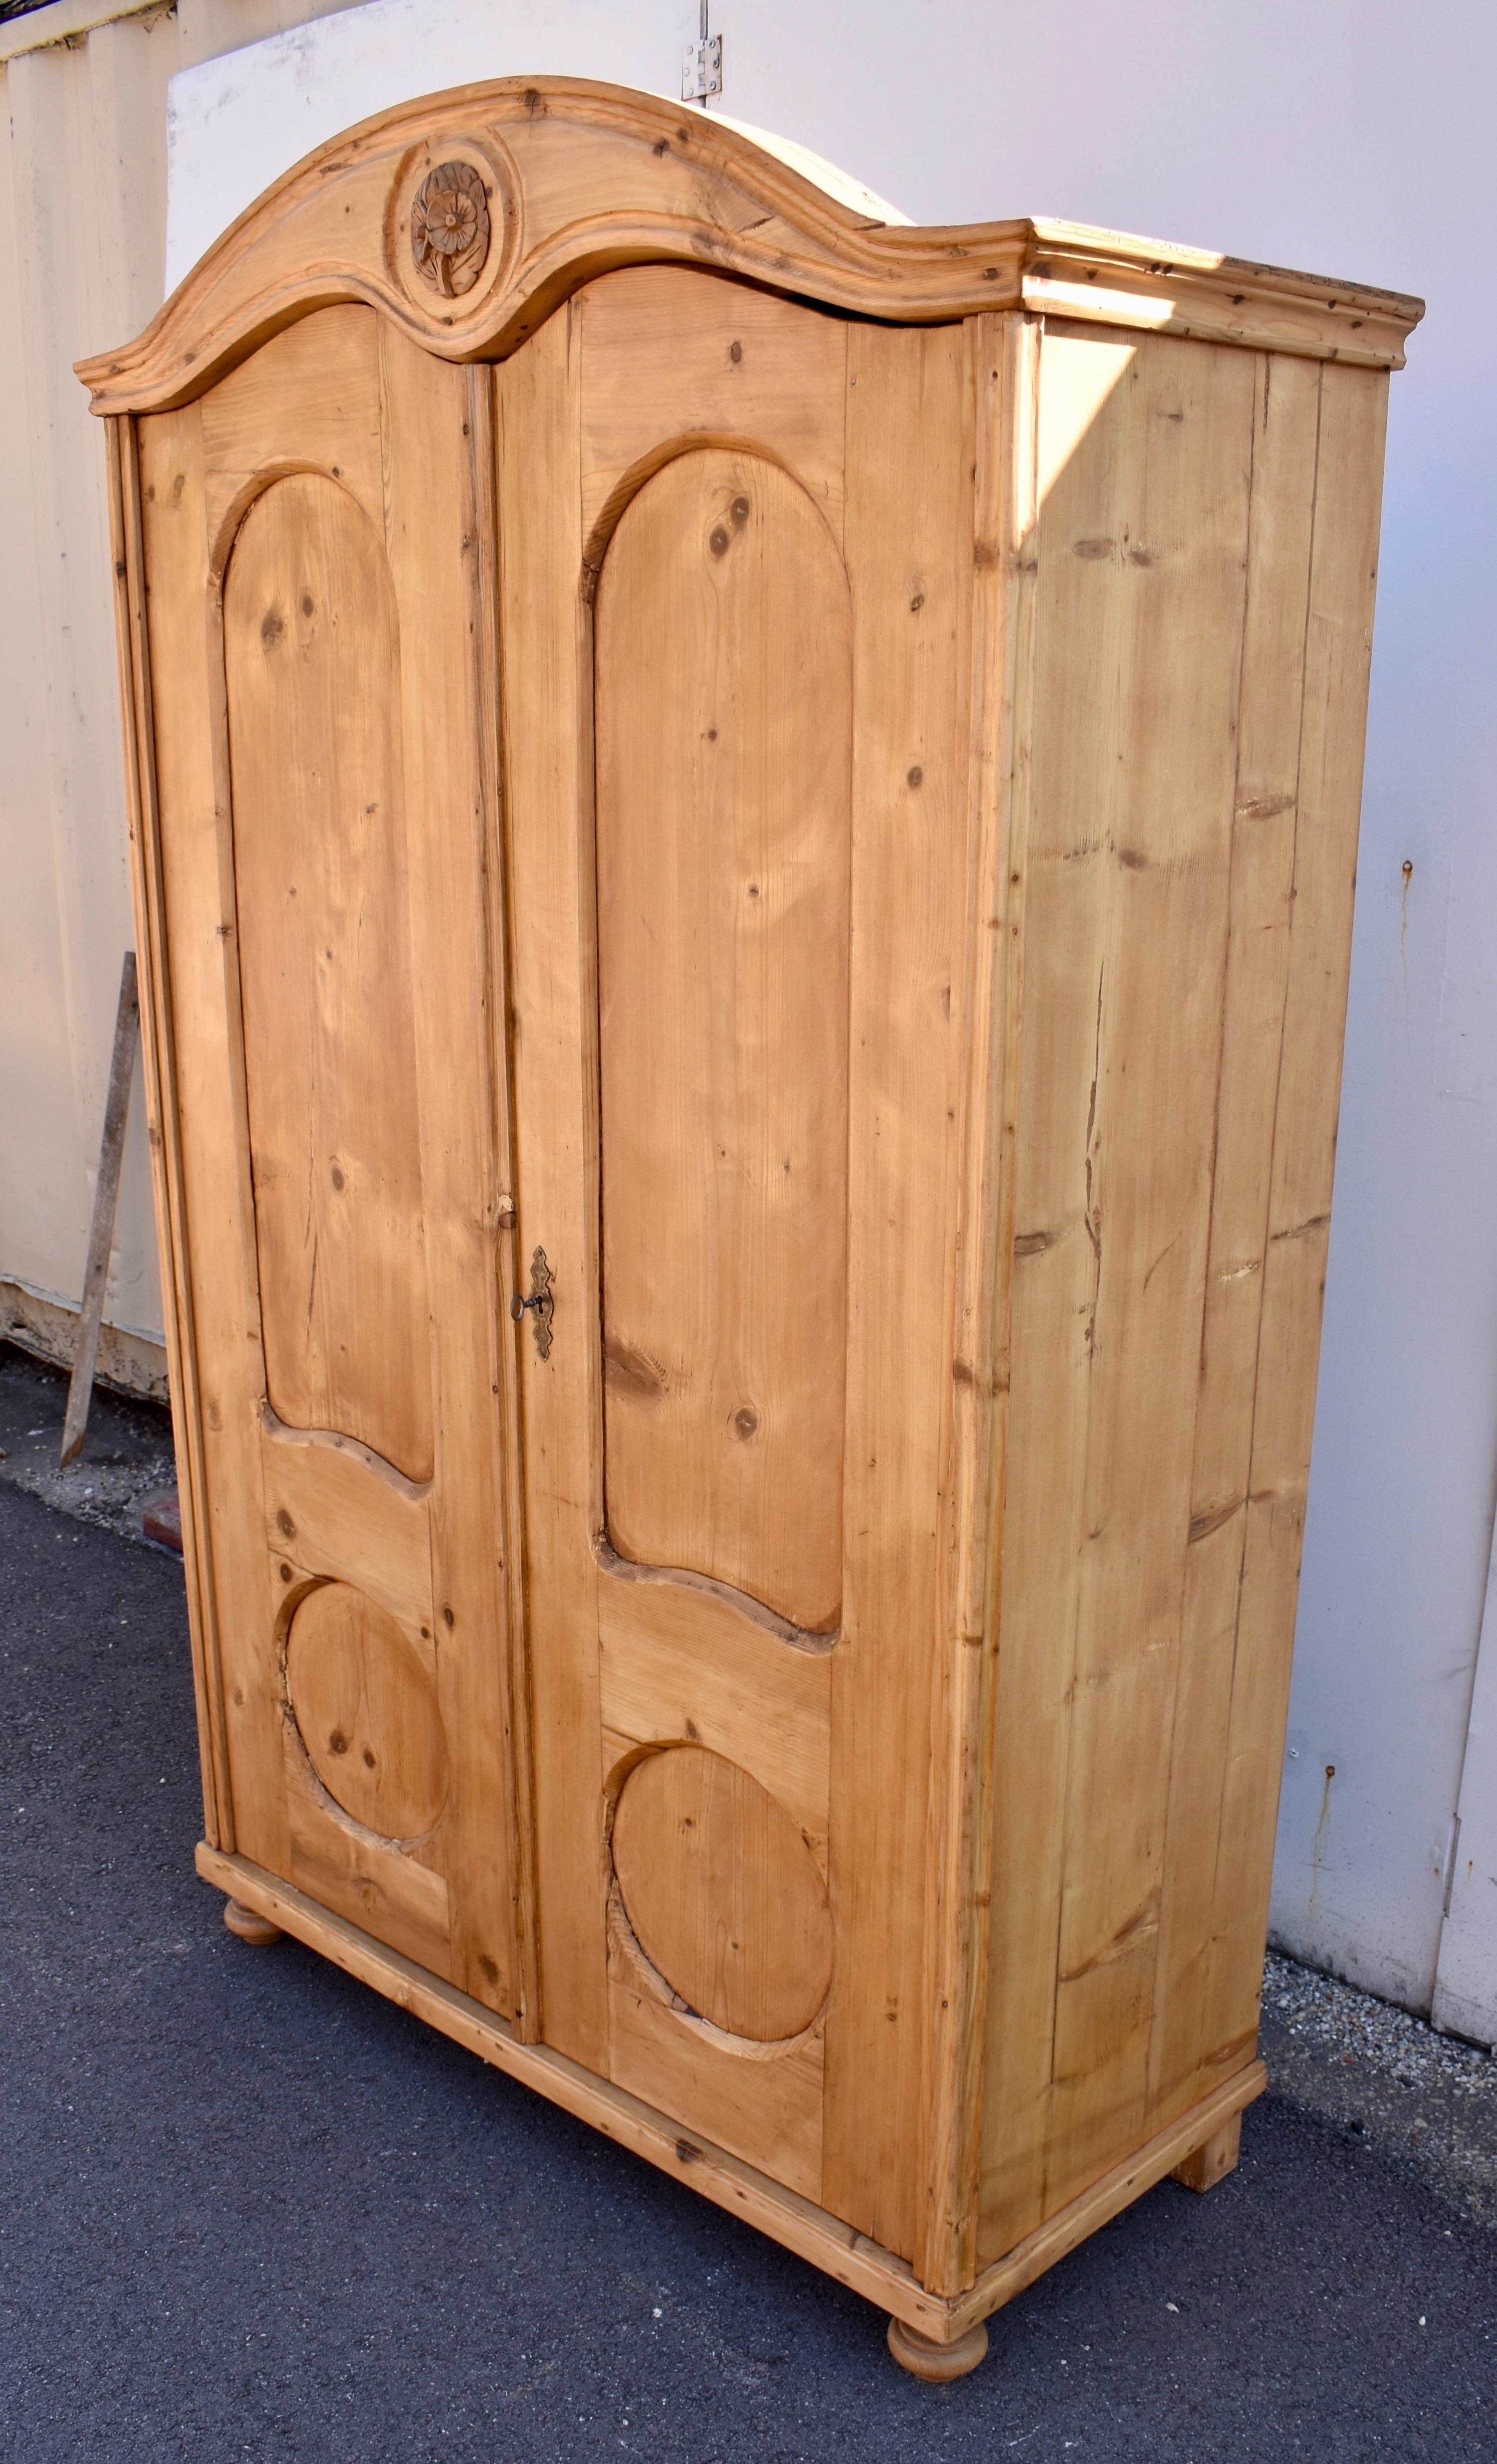 Queen Anne Pine Bonnet-Top Armoire with Two Doors and One Drawer